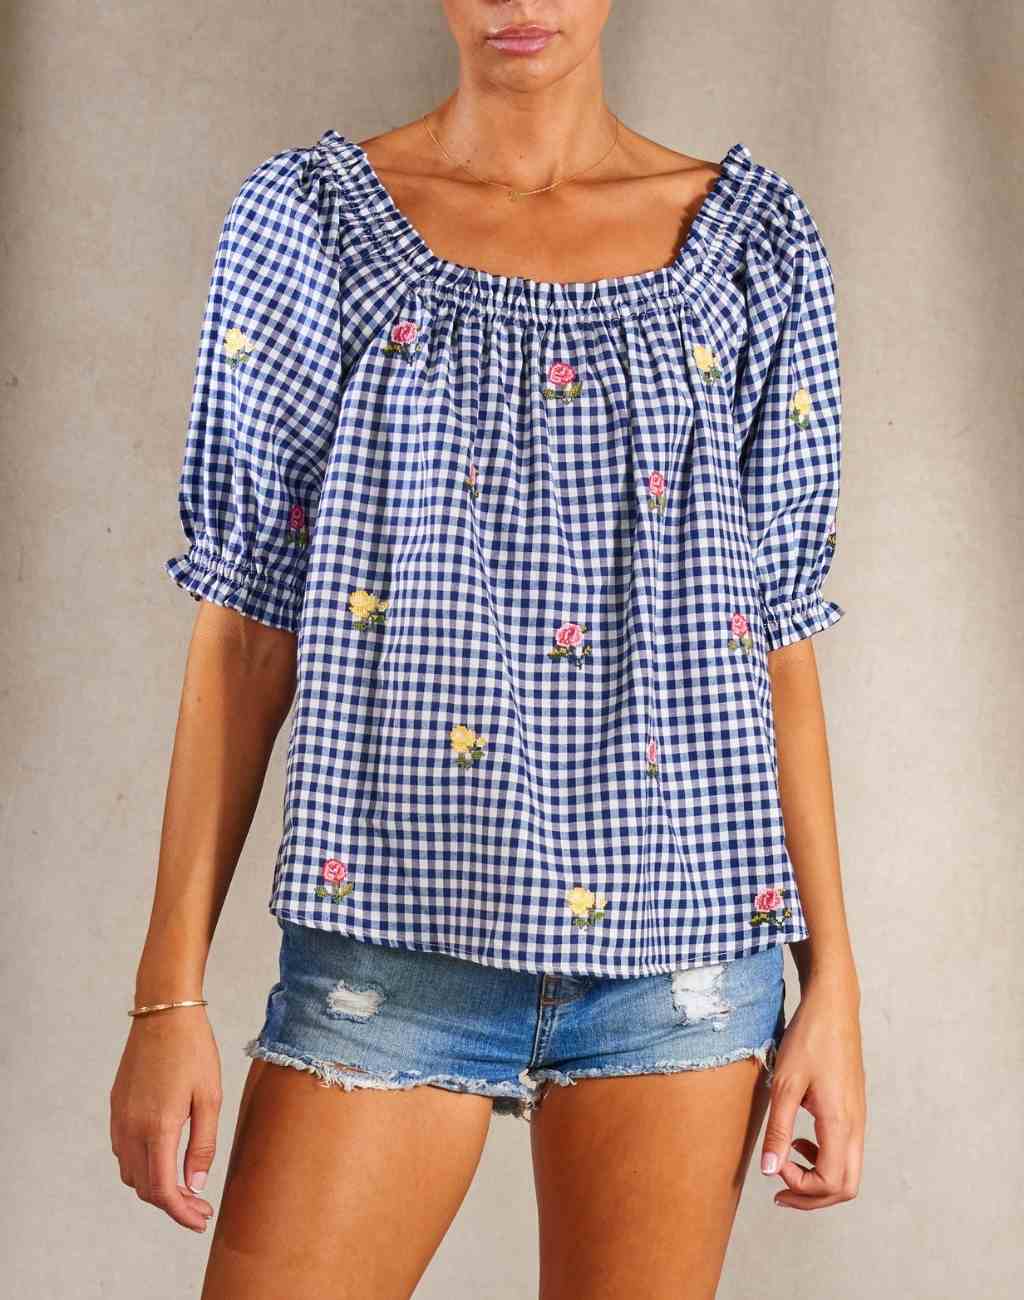 Navy and White Gingham Top with Elasticized Neck | Embroidered Flowers - Visit Nifty M.A.B.E. 